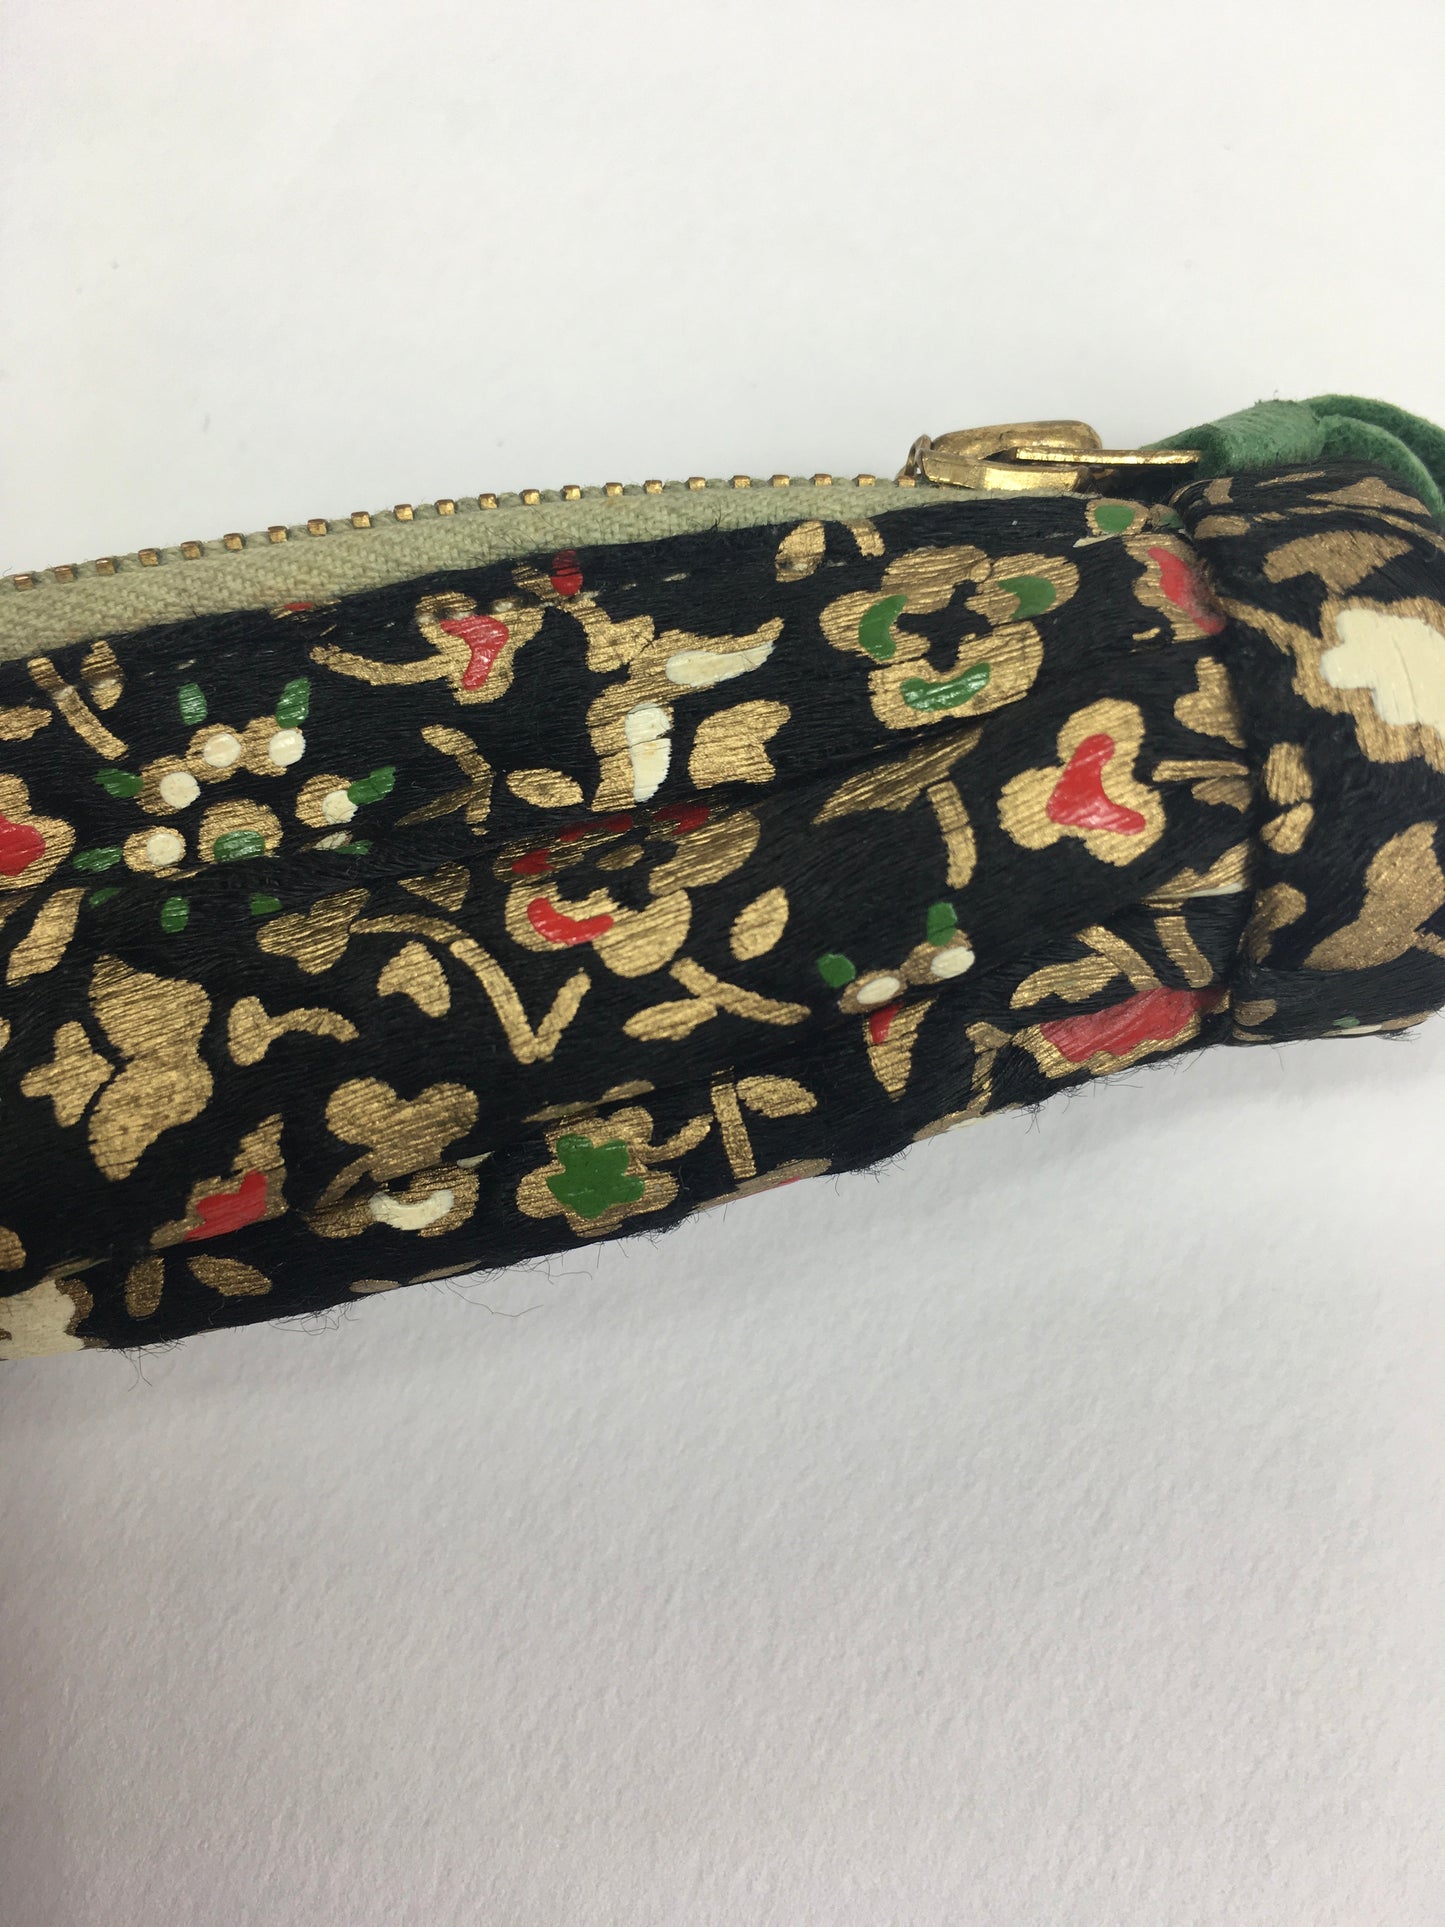 Original 1930’s Handpainted Expandable Coin Purse - In An Exquisite Floral in Gold, Green and Red